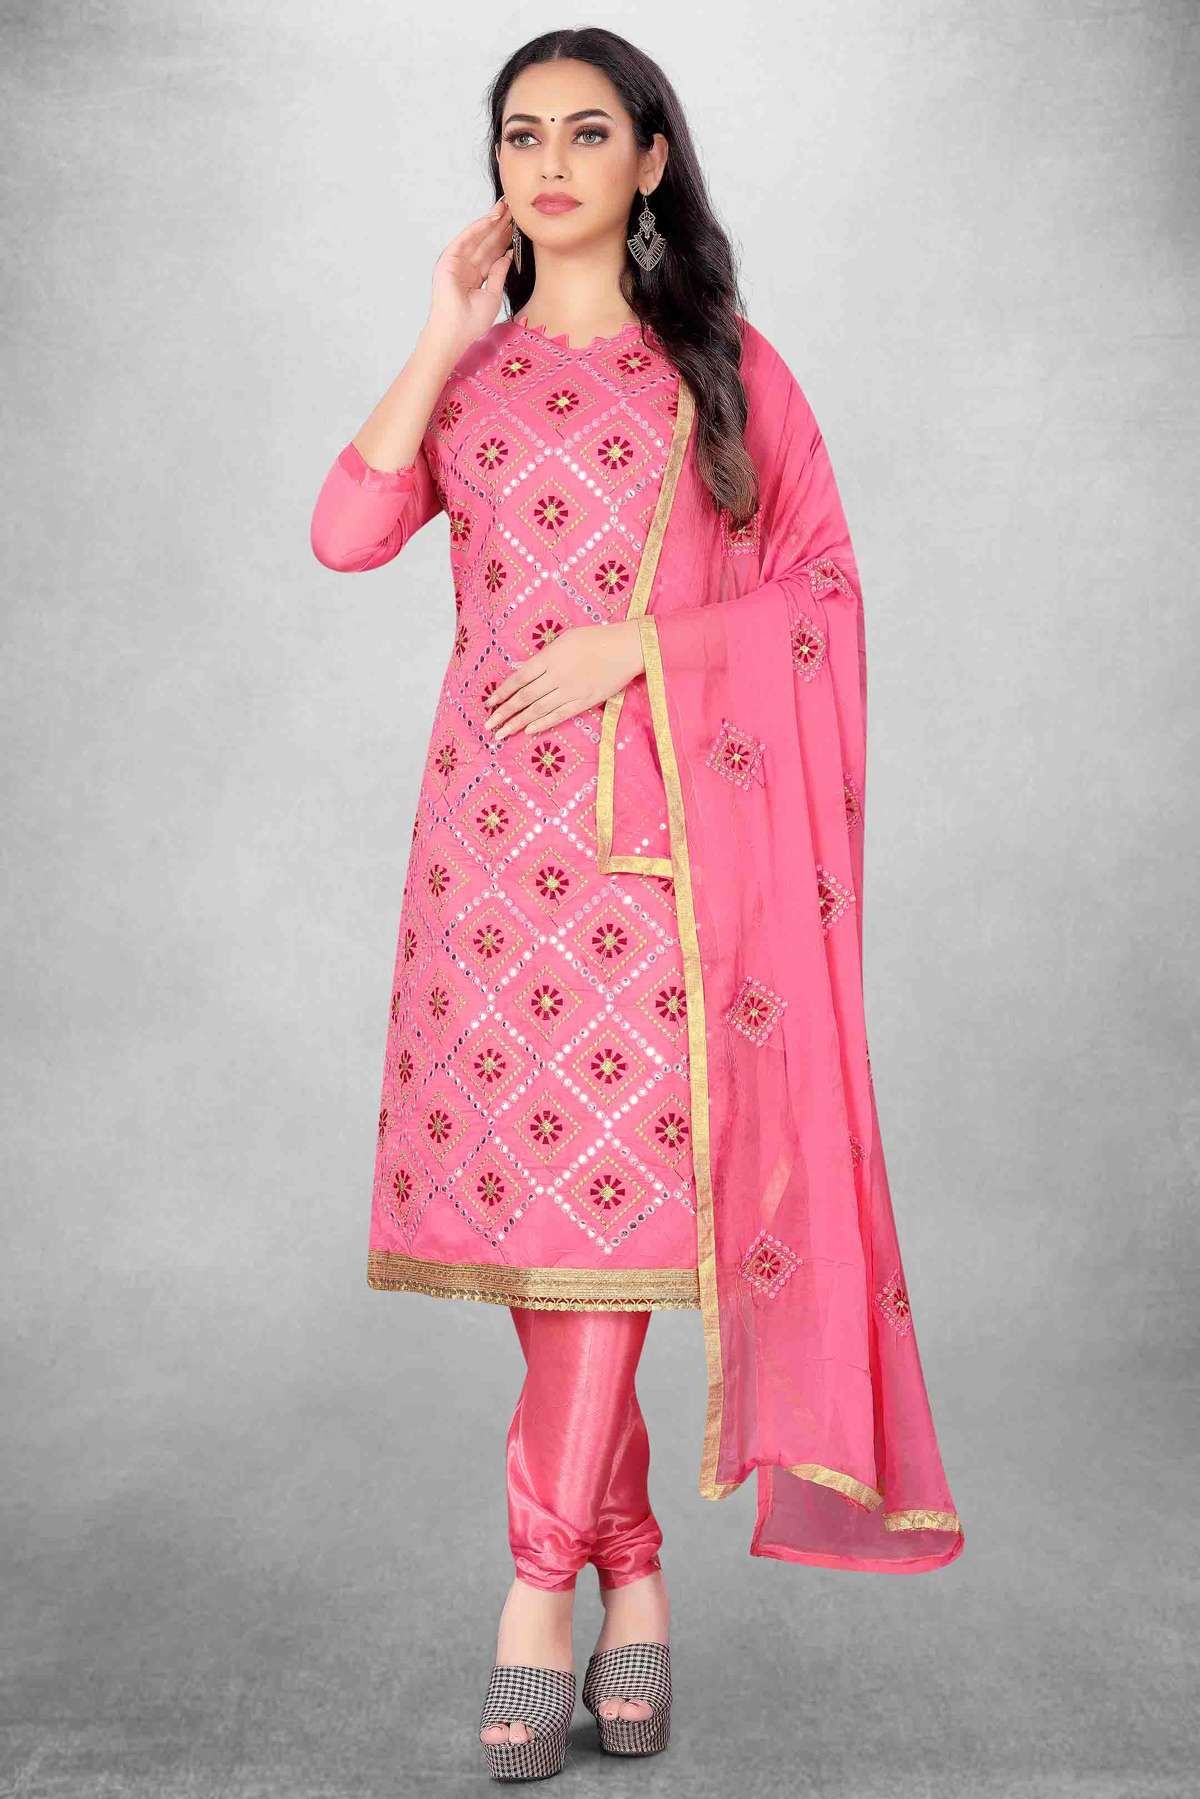 Unstitched Modal Cotton Embroidery Churidar Suit In Pink Colour - US3234451